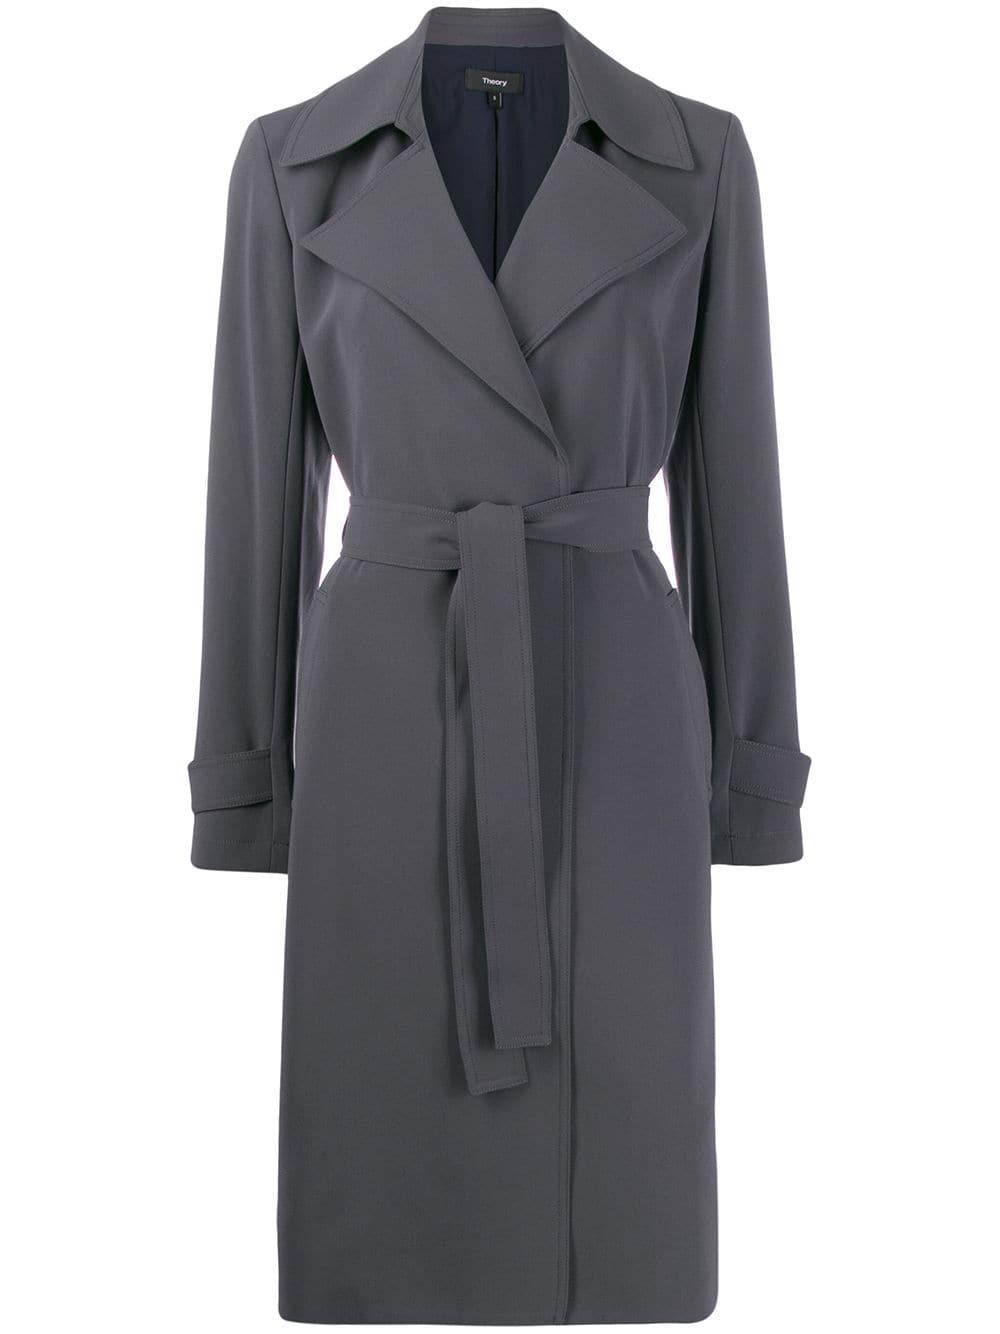 Theory Oaklane Trench Coat in Grey (Gray) - Lyst